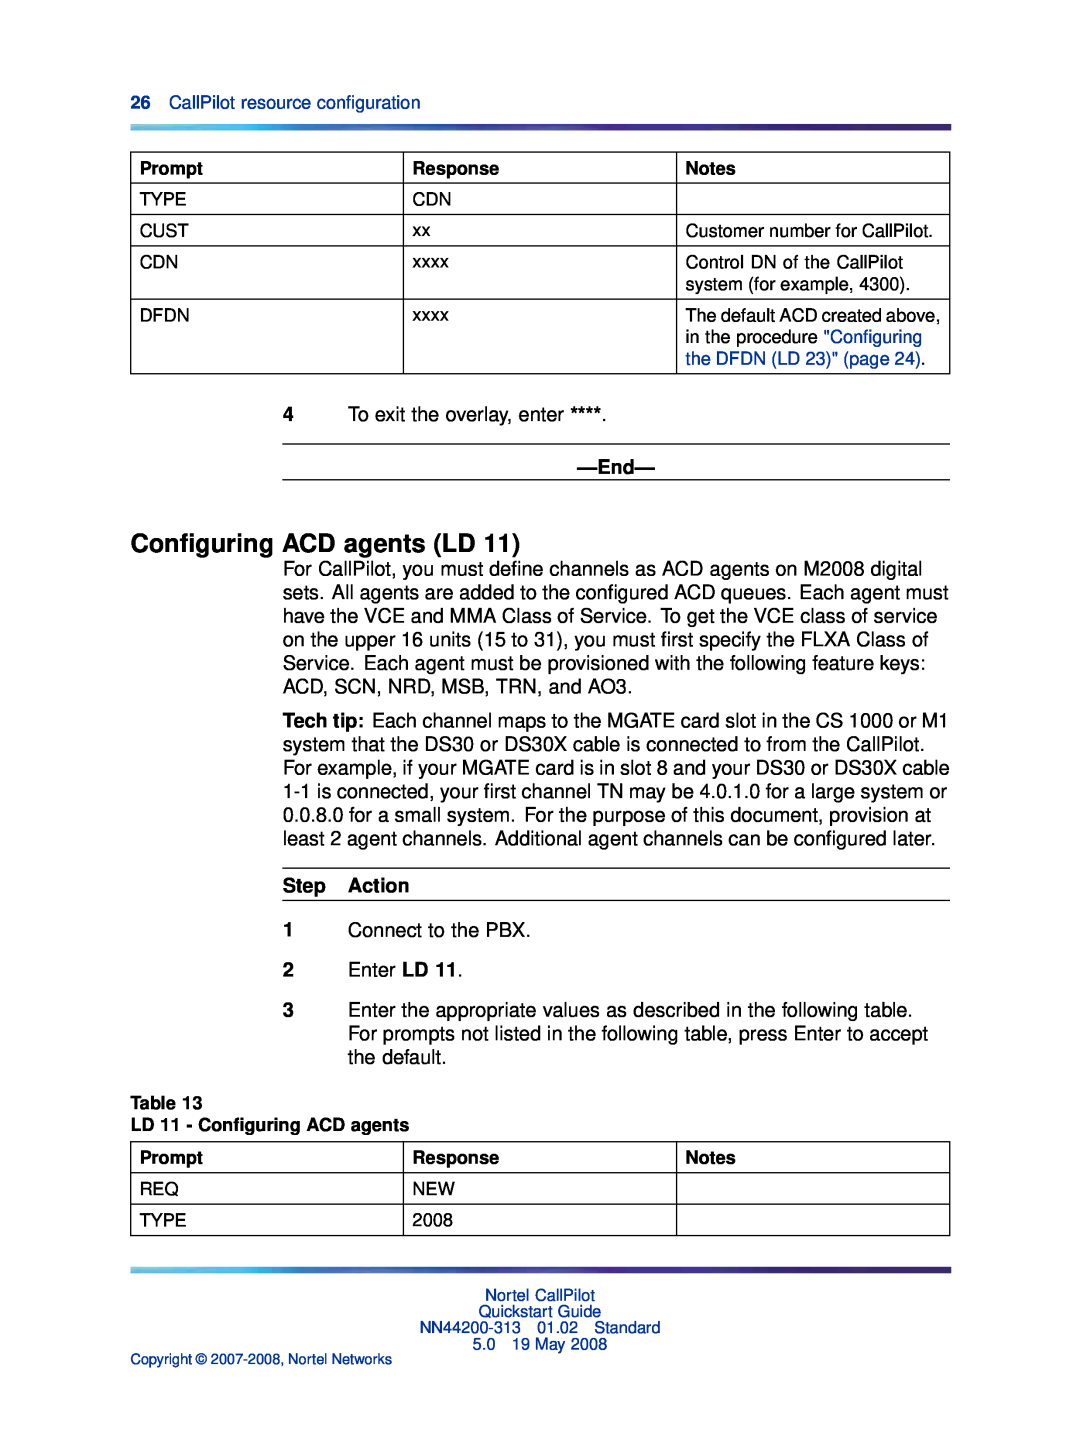 Nortel Networks NN44200-313 Conﬁguring ACD agents LD, Step Action, CallPilot resource conﬁguration, the DFDN LD 23 page 